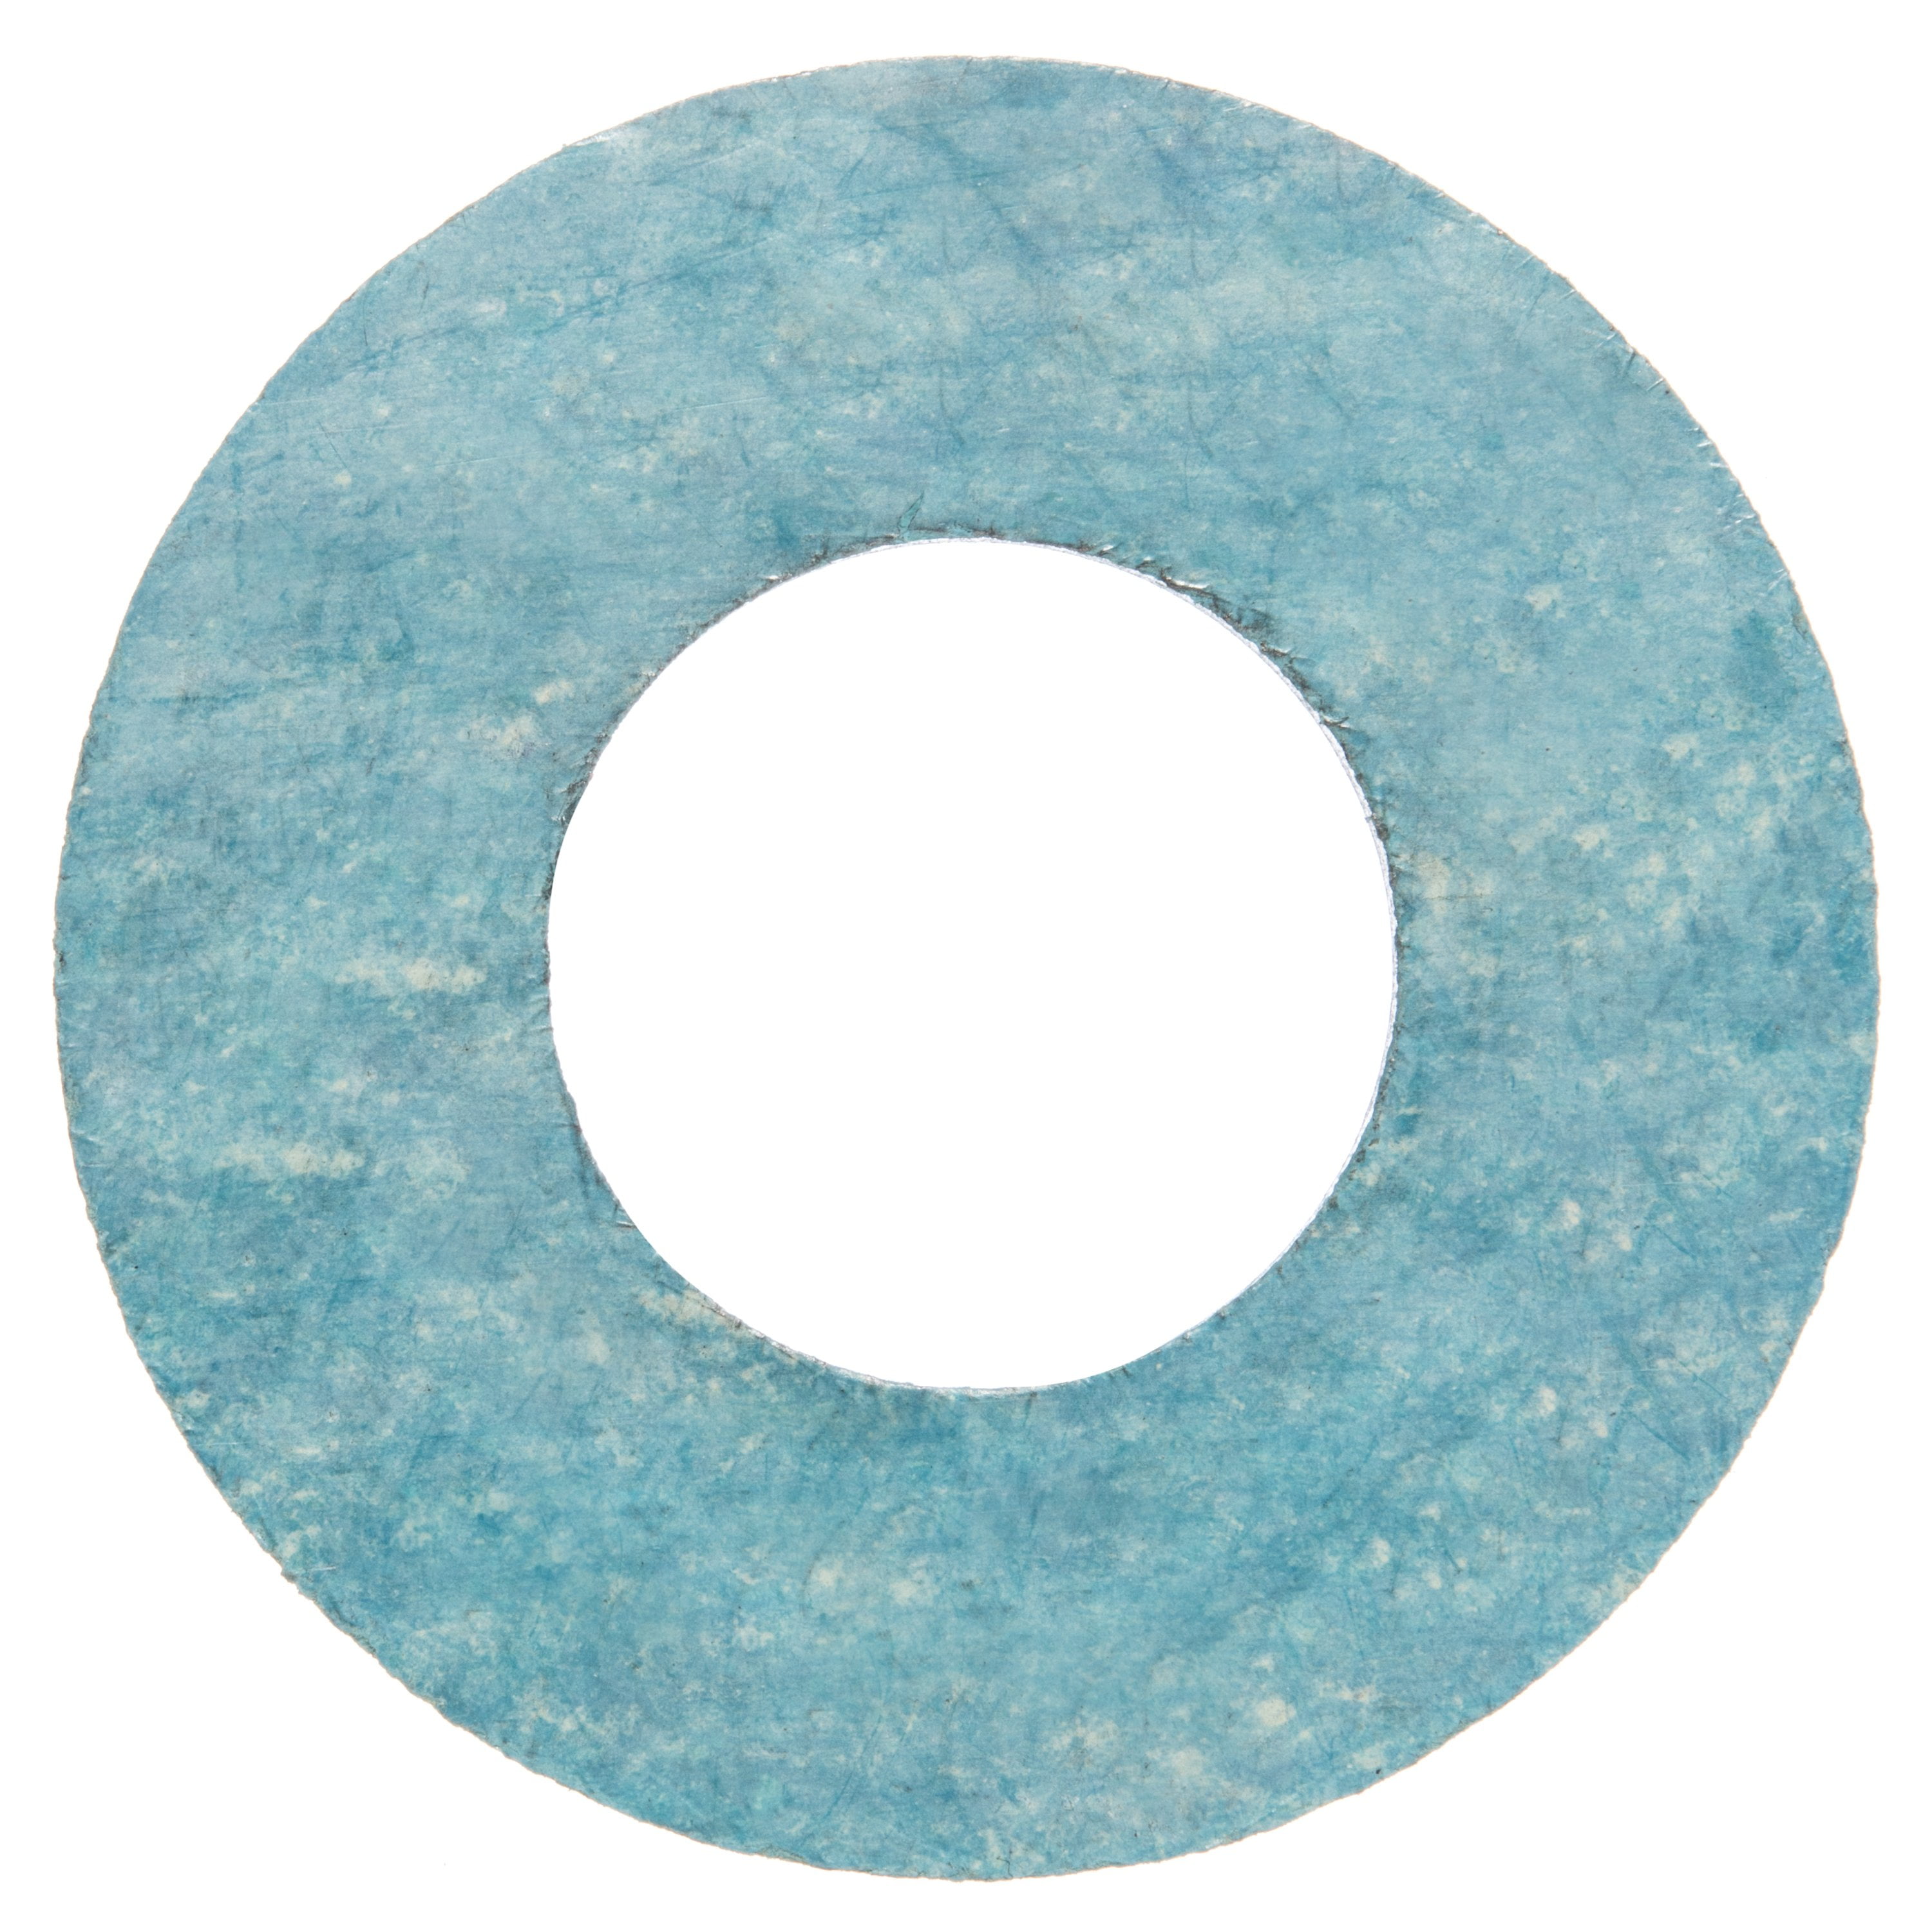 Raised Face Aramid/Buna-N Flange Gasket for 14 Pipe - 1/16 Thick - Class  150